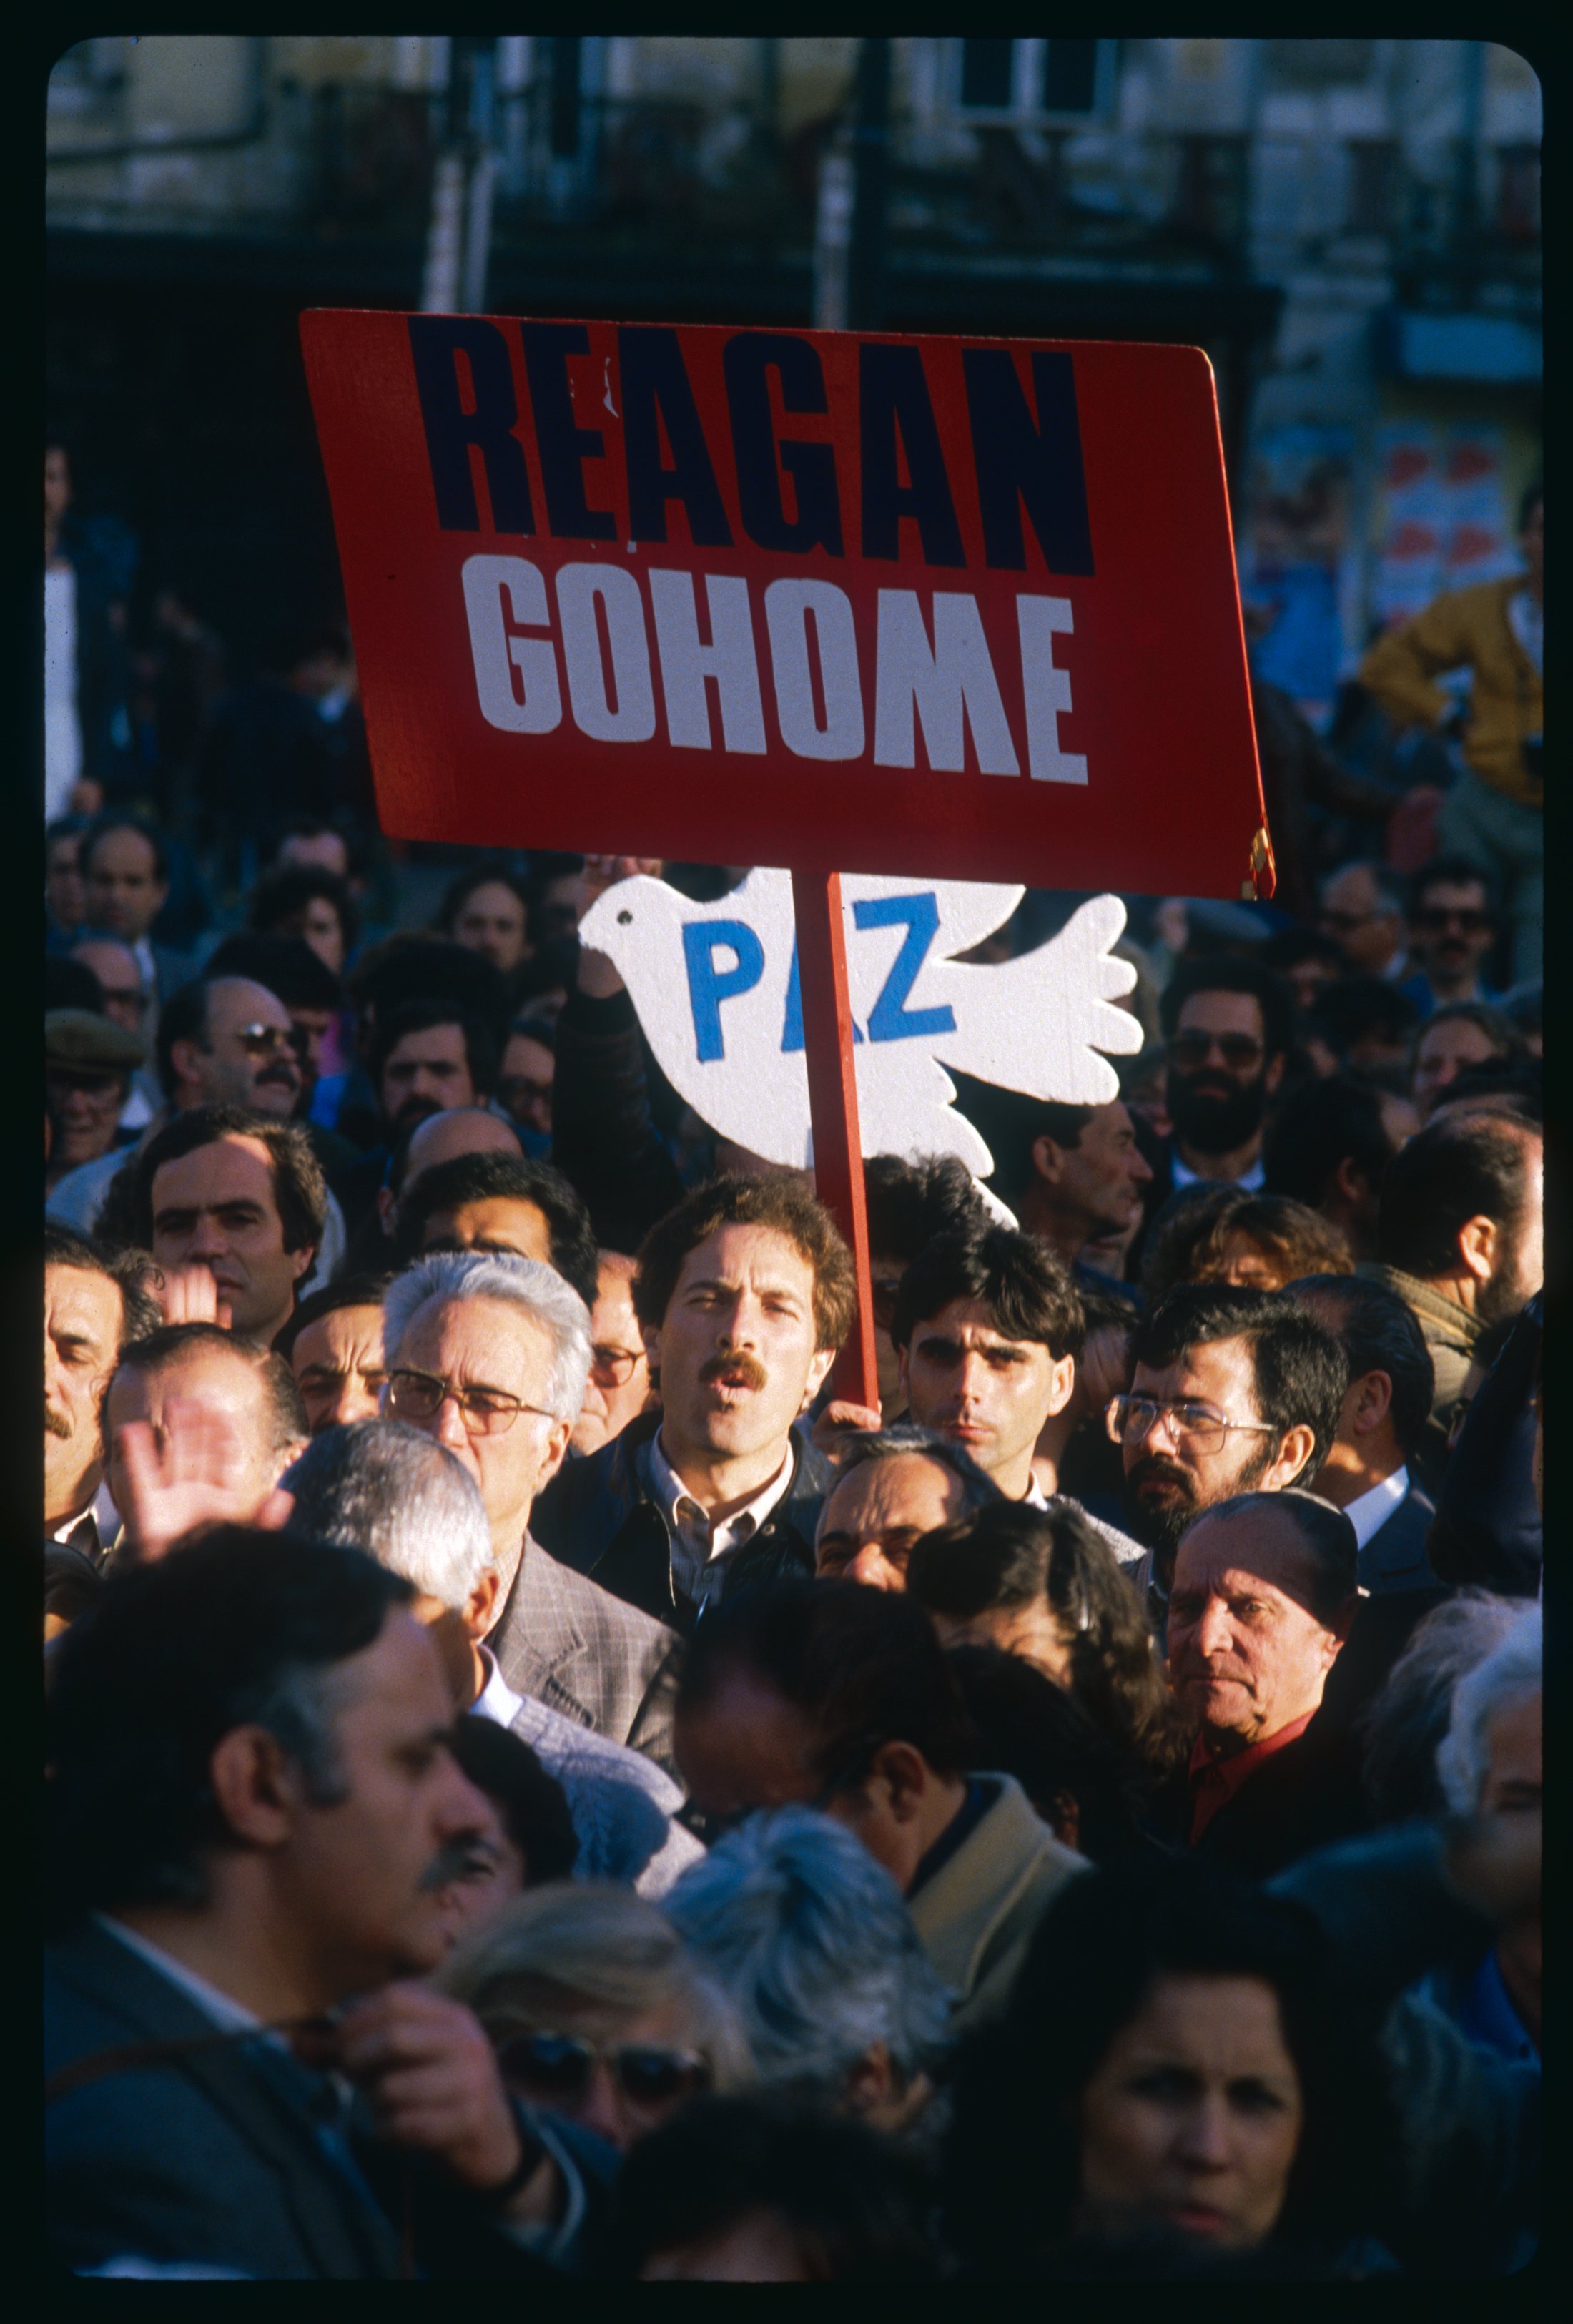 Anti-Reagan Demonstration of the Portuguese Communist Party